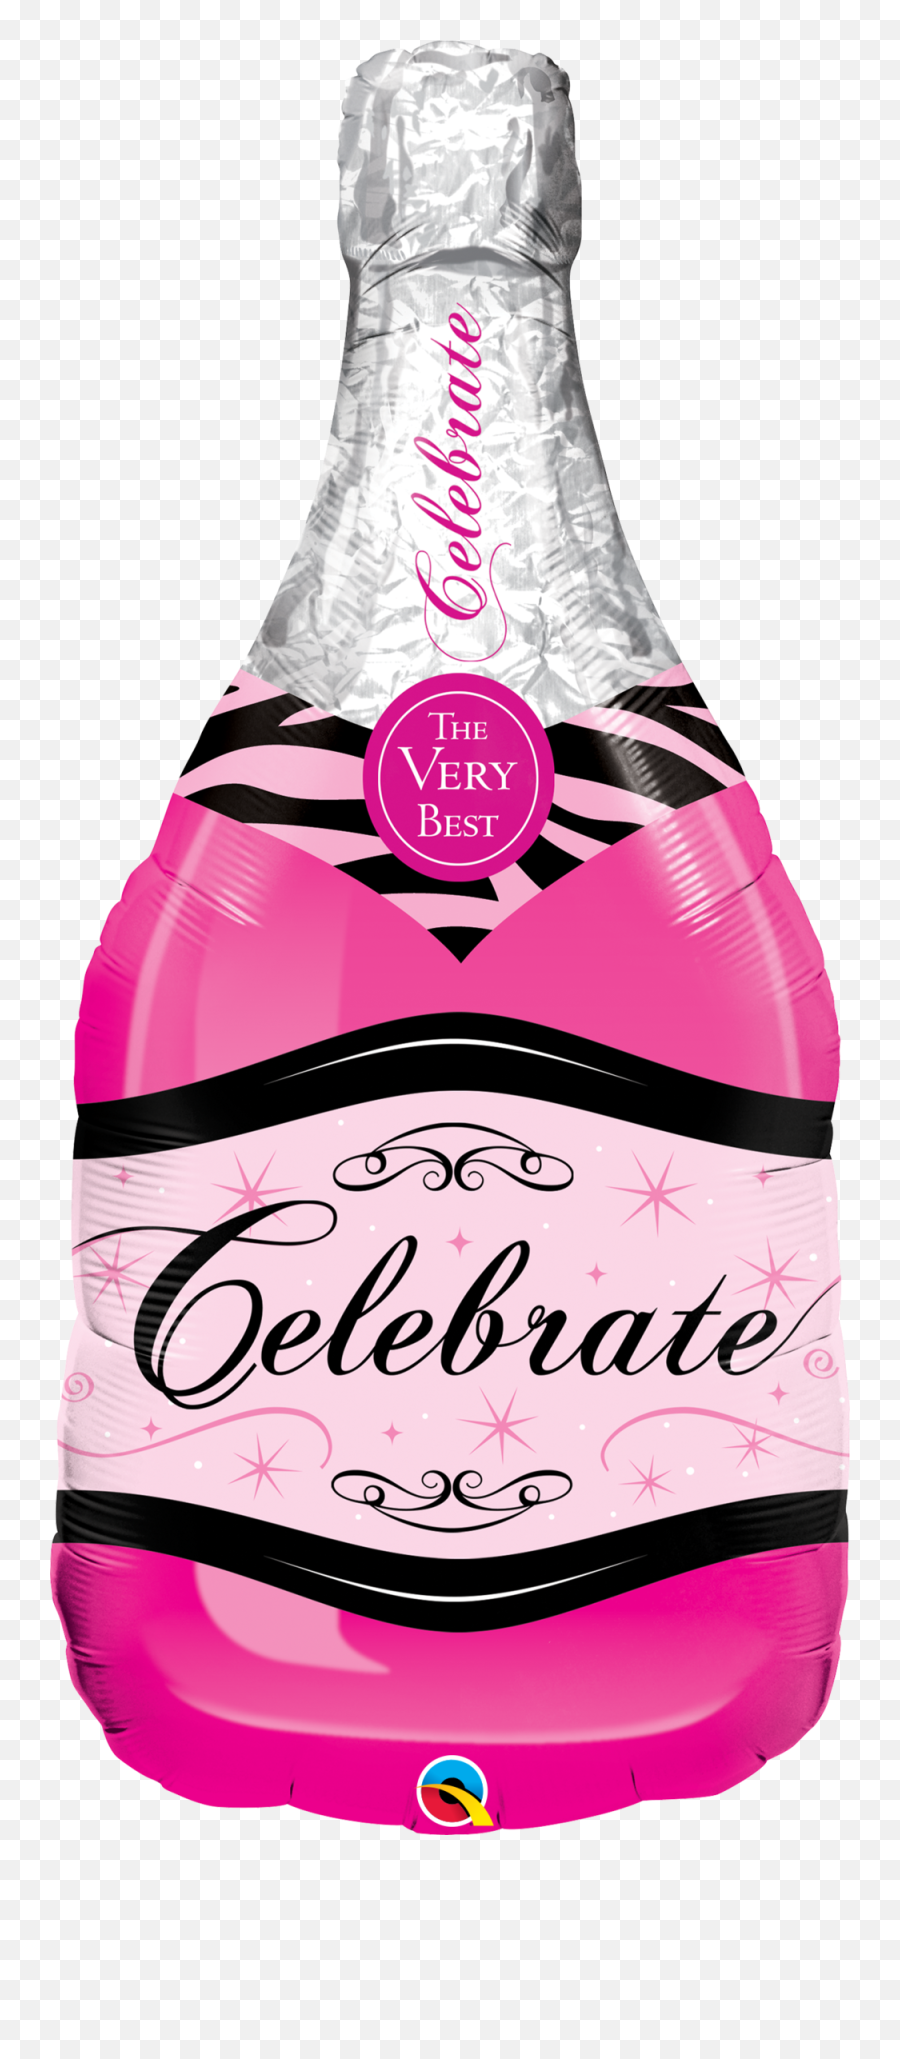 39 Celebrate Champagne Bottle Foil Balloon Pink Free Shipping Png